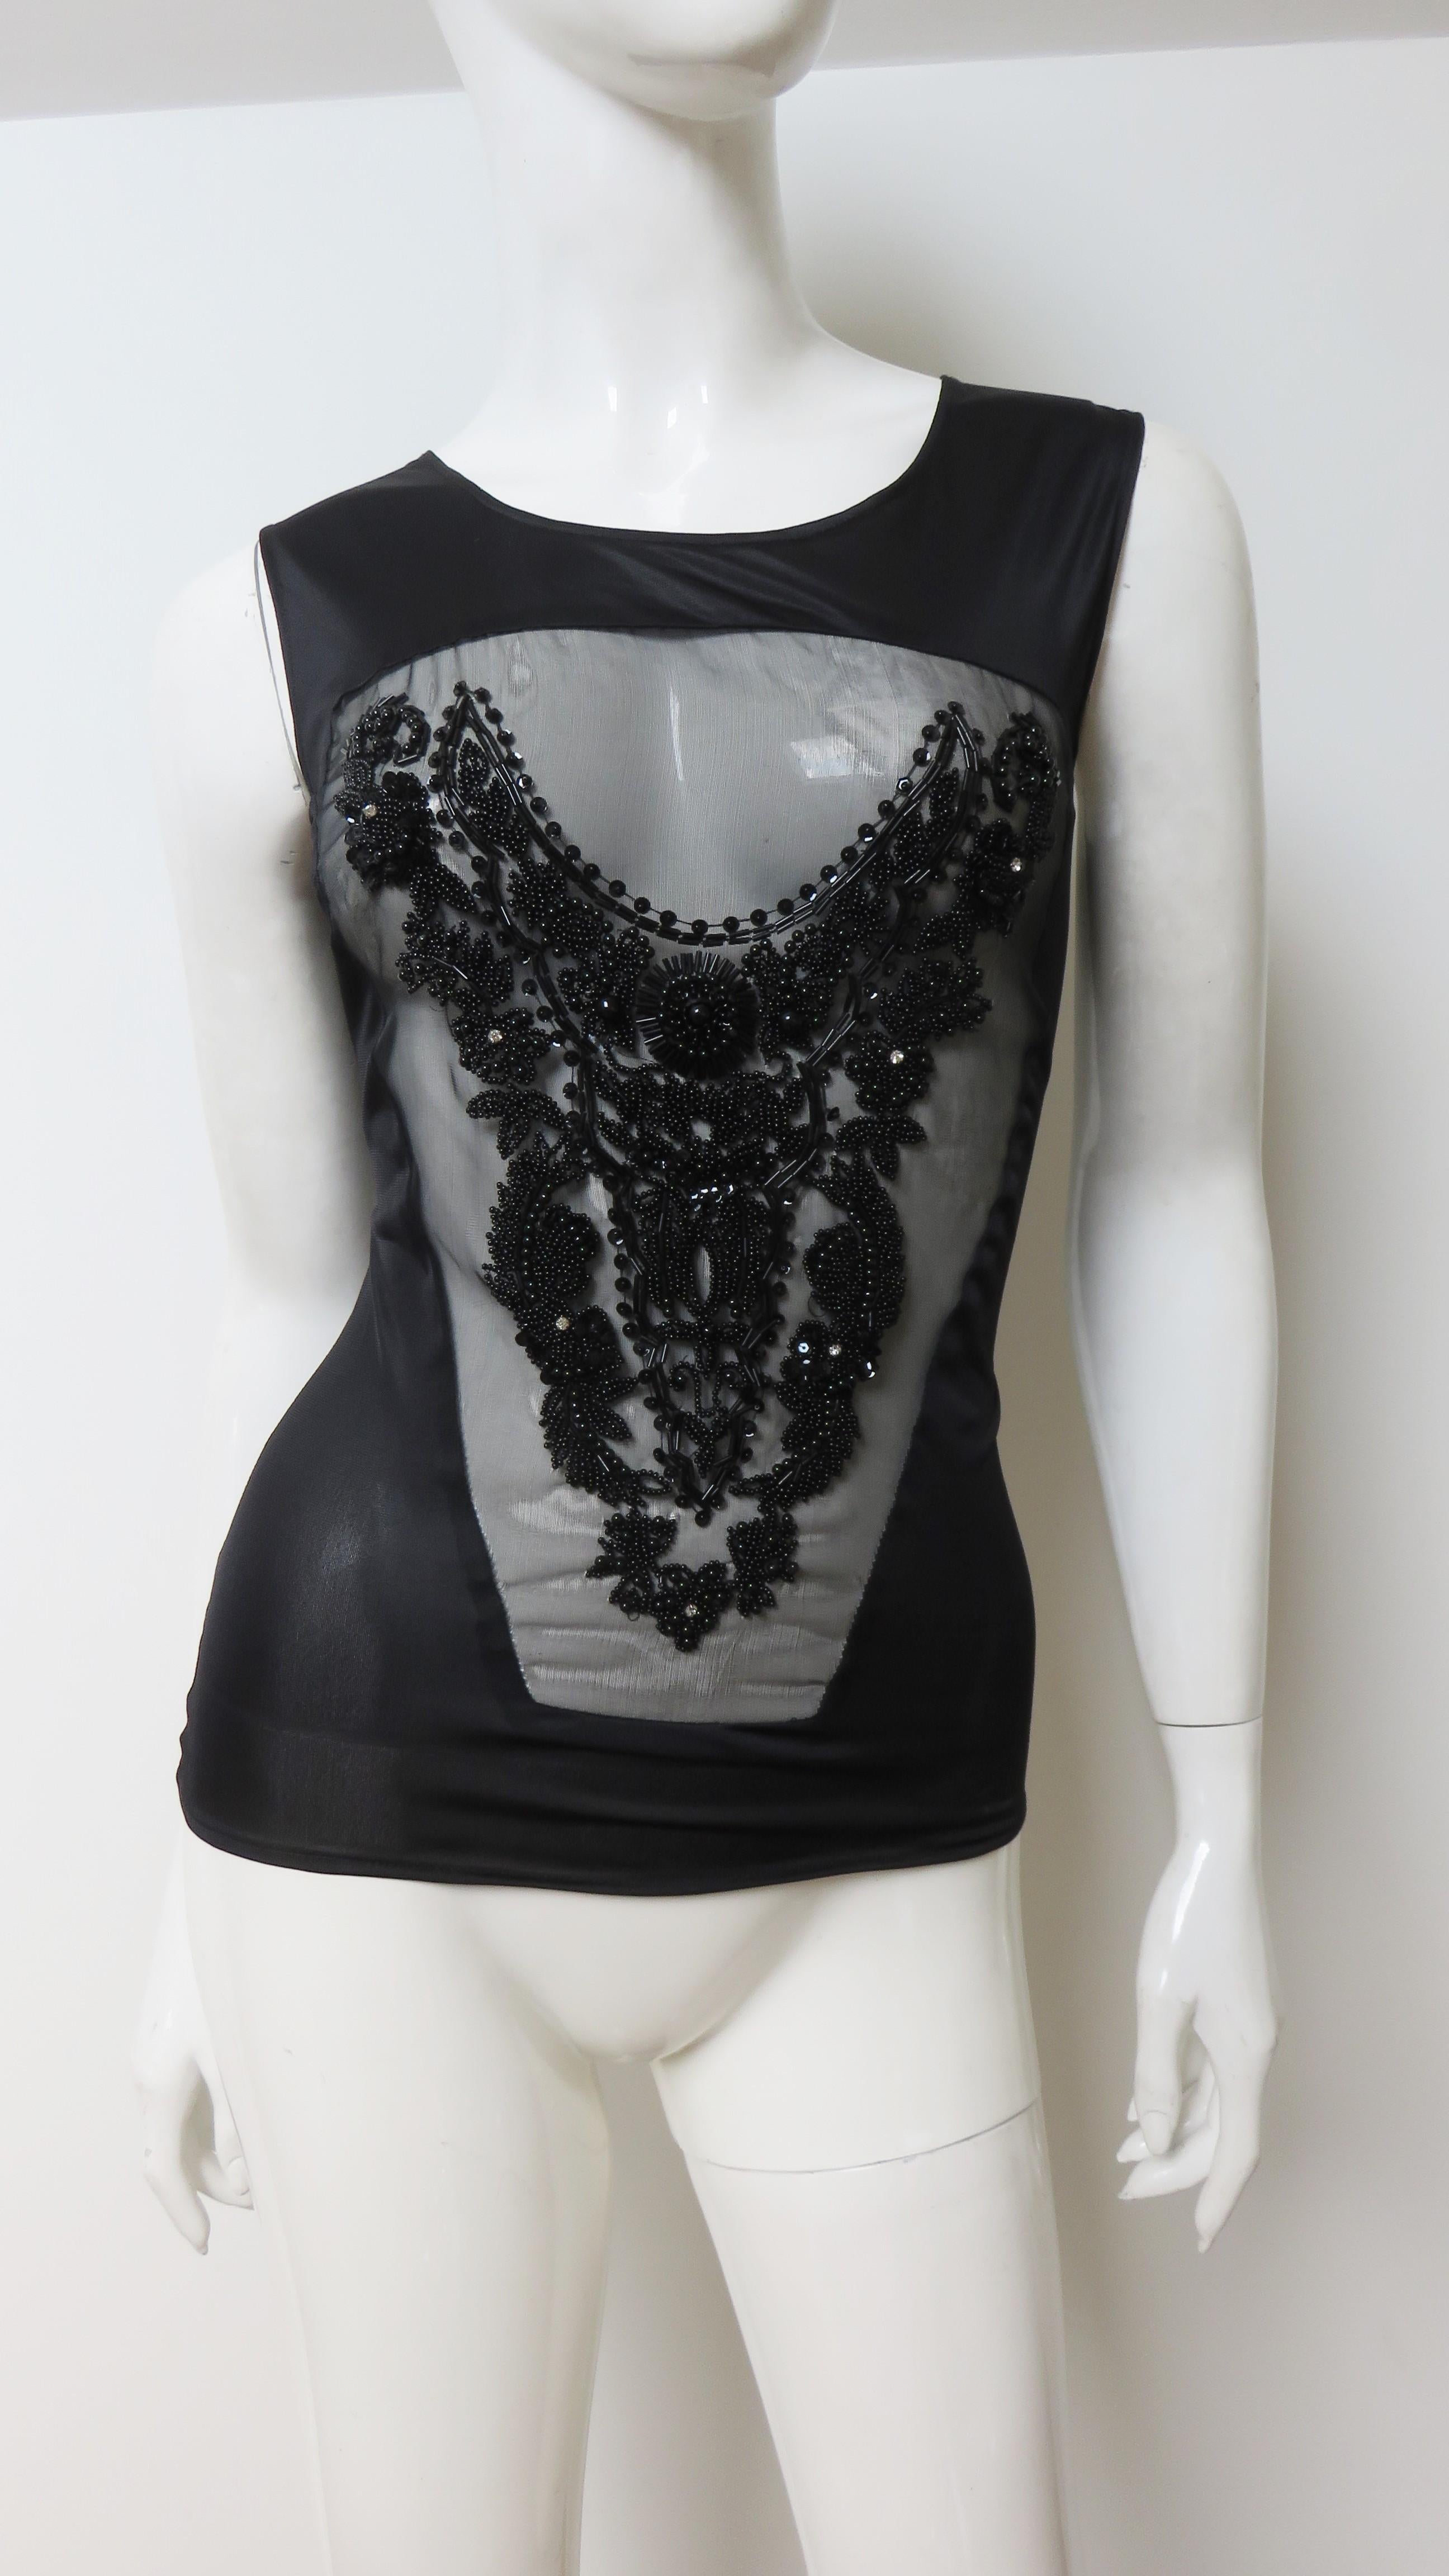 A fabulous black beaded top from Jean Colonna.  It is sleeveless with a crew neckline and a front sheer panel adorned with an elaborate pattern of  black glass tubular, seed and round beads. Gorgeous. The back is solid opaque black.
Fits sizes Extra